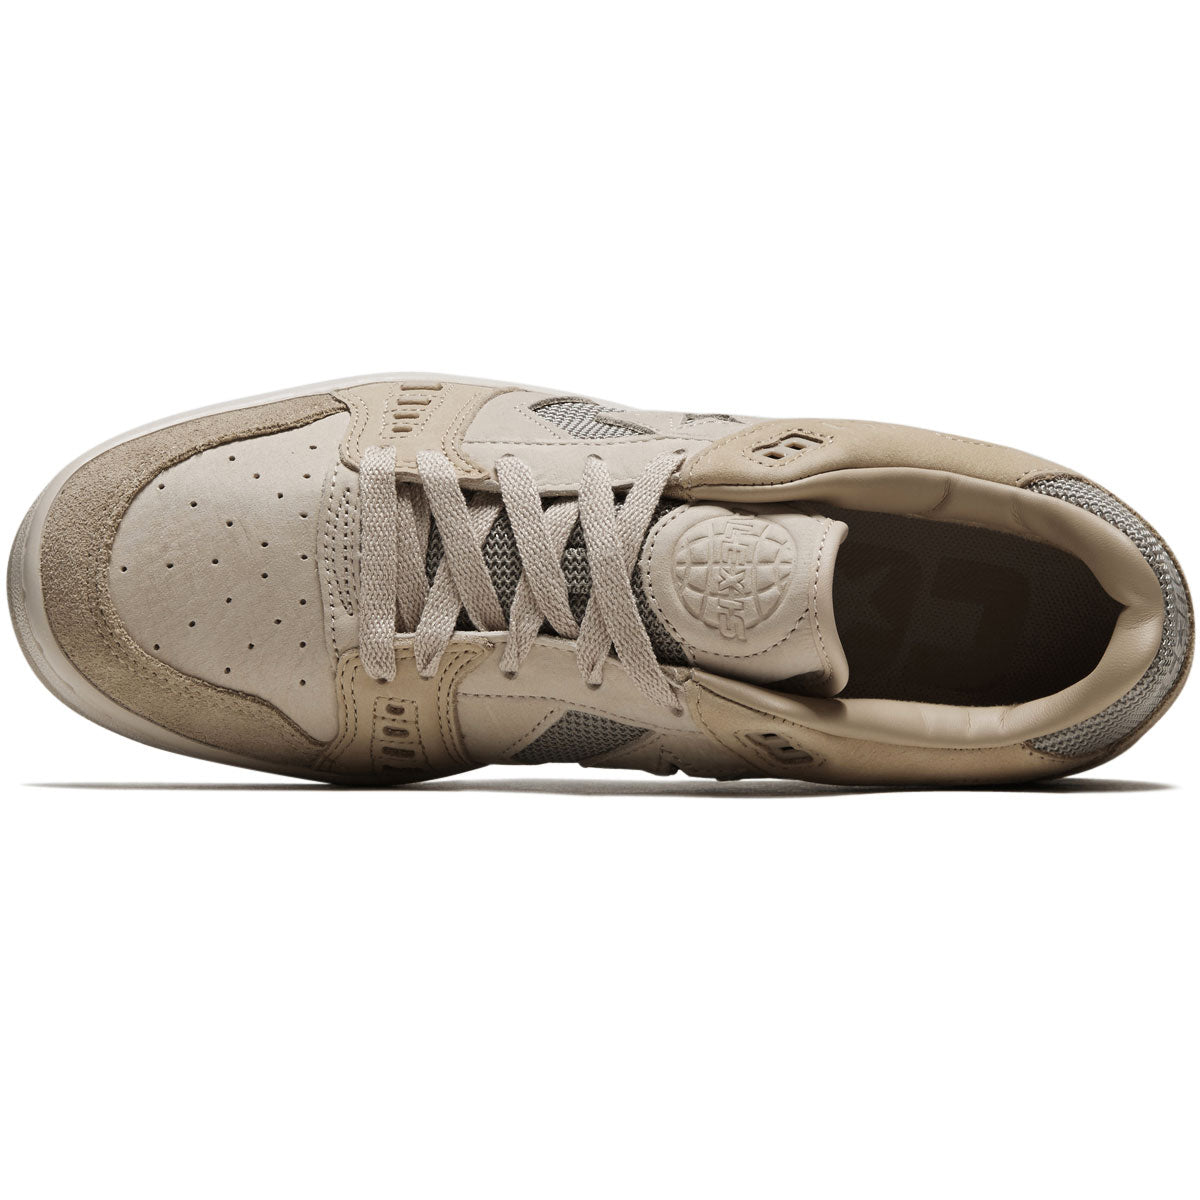 Converse AS-1 Pro Shoes - Shifting Sand/Warm Sand image 3